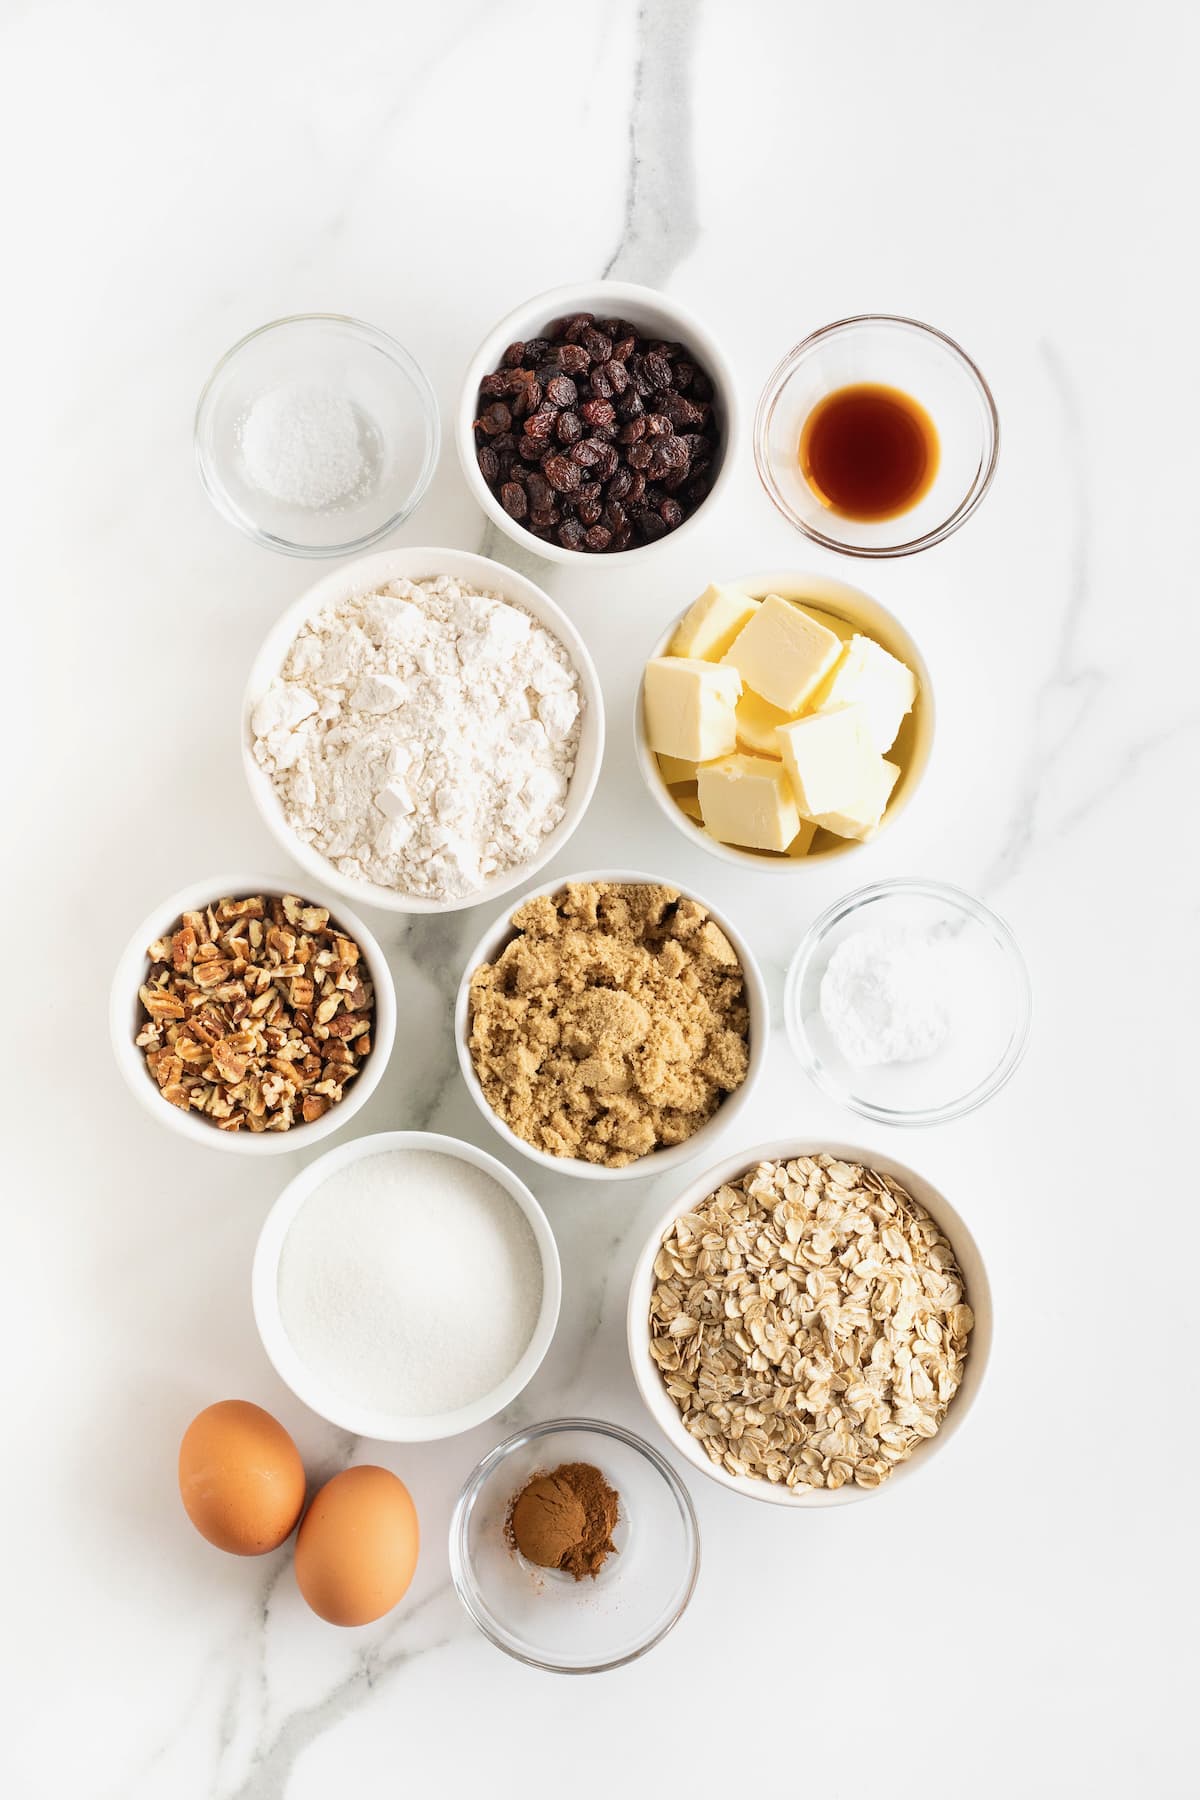 Ingredients to make oatmeal raisin cookies with pecans in small glass dishes on a white marble counter.